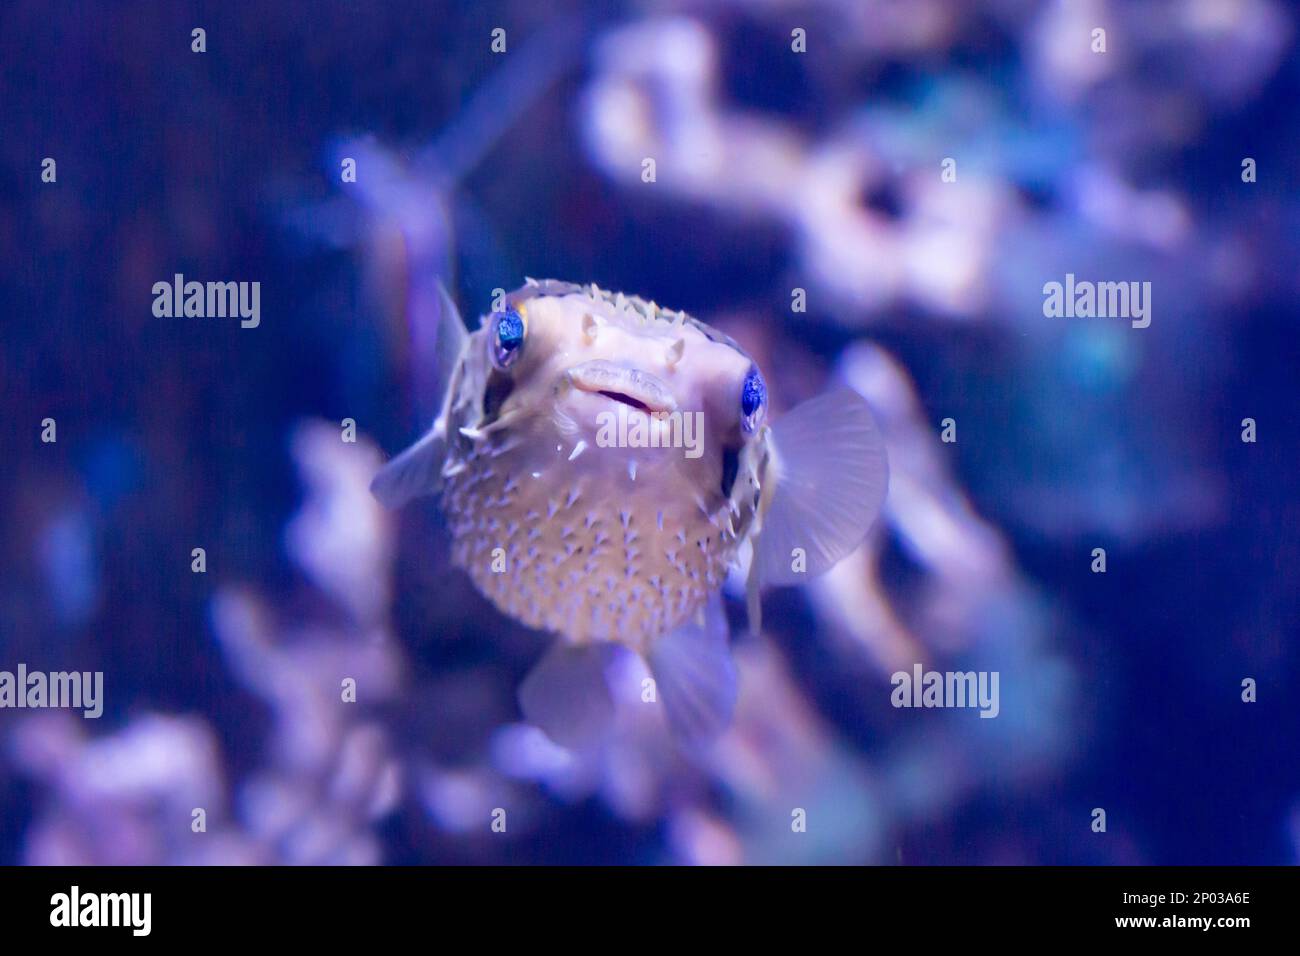 Porcupinefish is hiding under under Lettuce coral. Ajargo, Giant Porcupinefish or Spotted Porcupine Fish Diodon hystrix and Lettuce coral or Yellow Sc Stock Photo